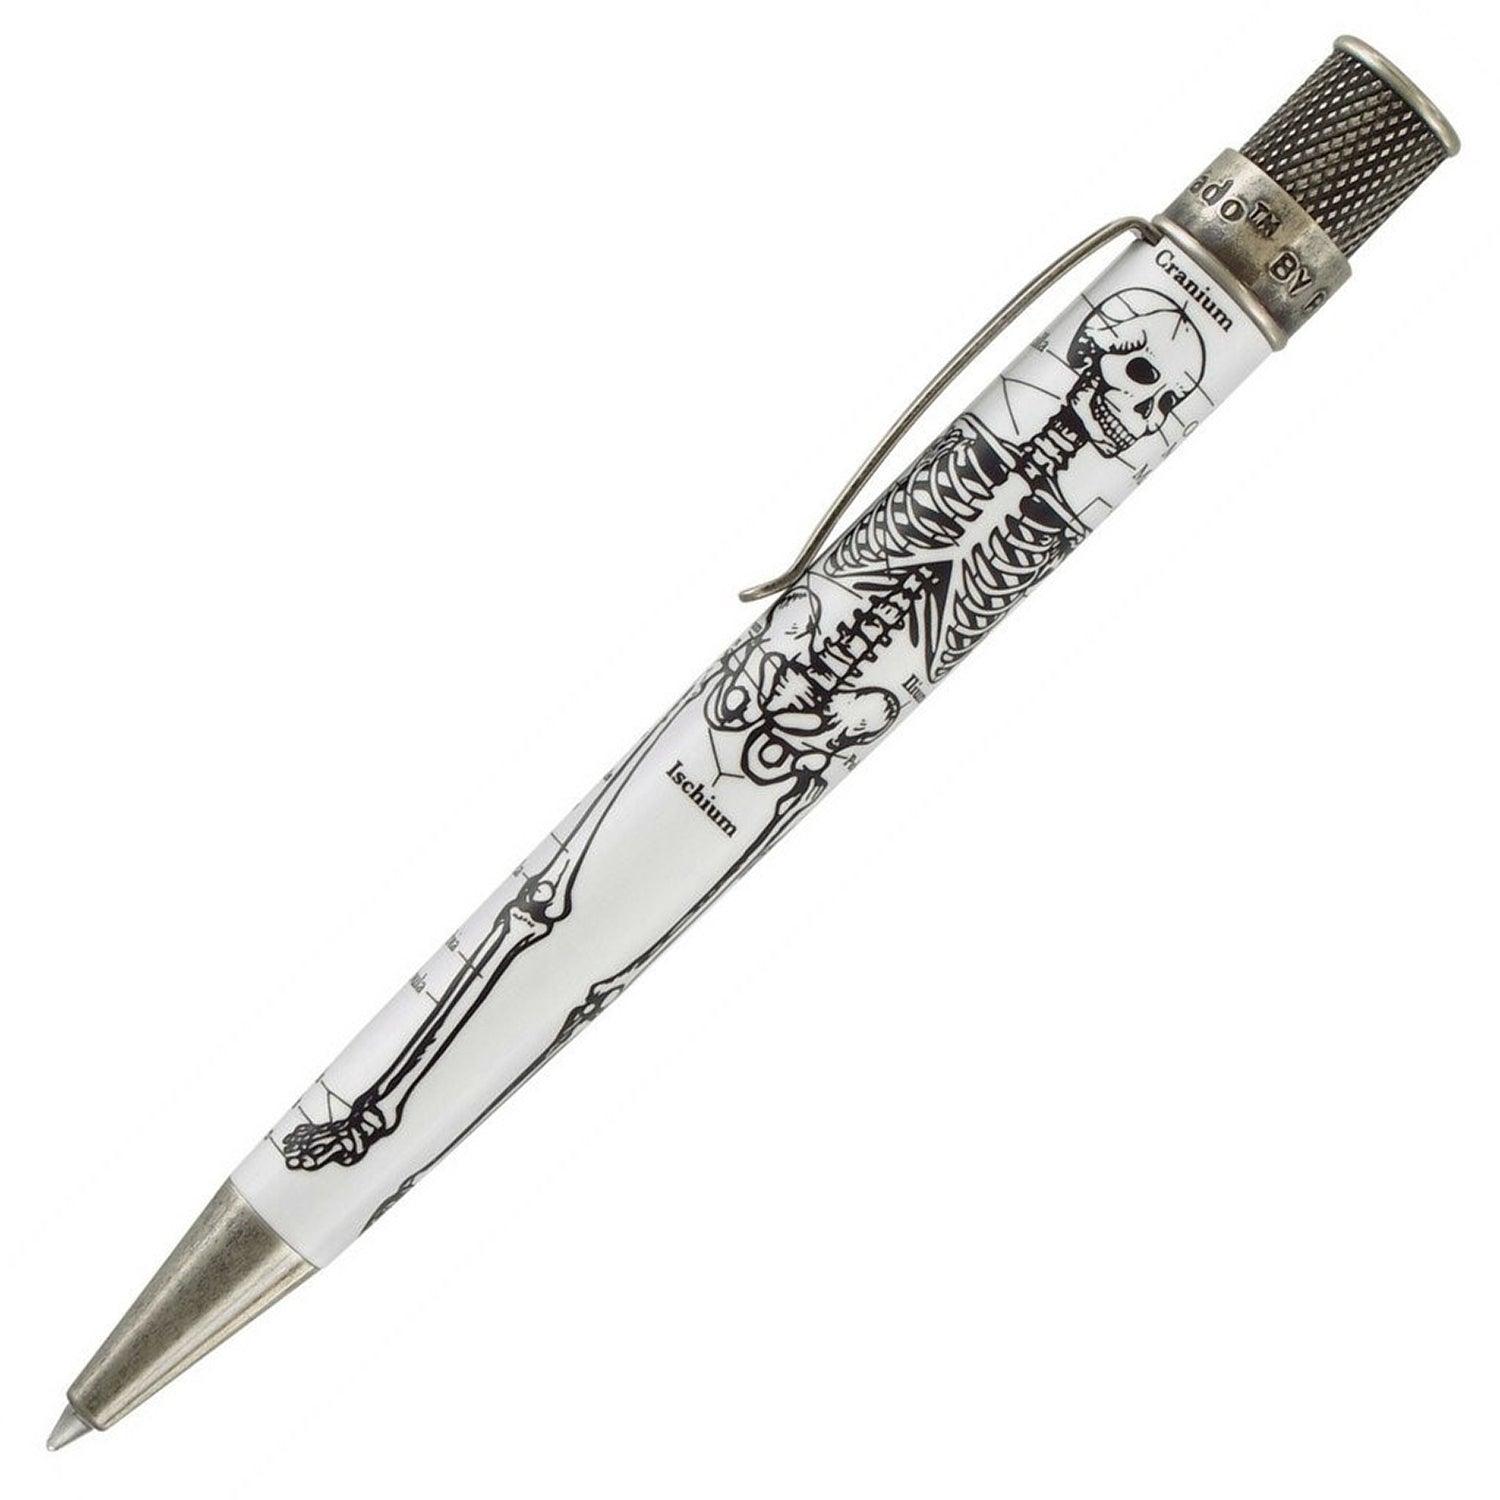 Retro Dr Gray Skeleton Rollerball Pen - Pens and Pencils - Science Museum Shop